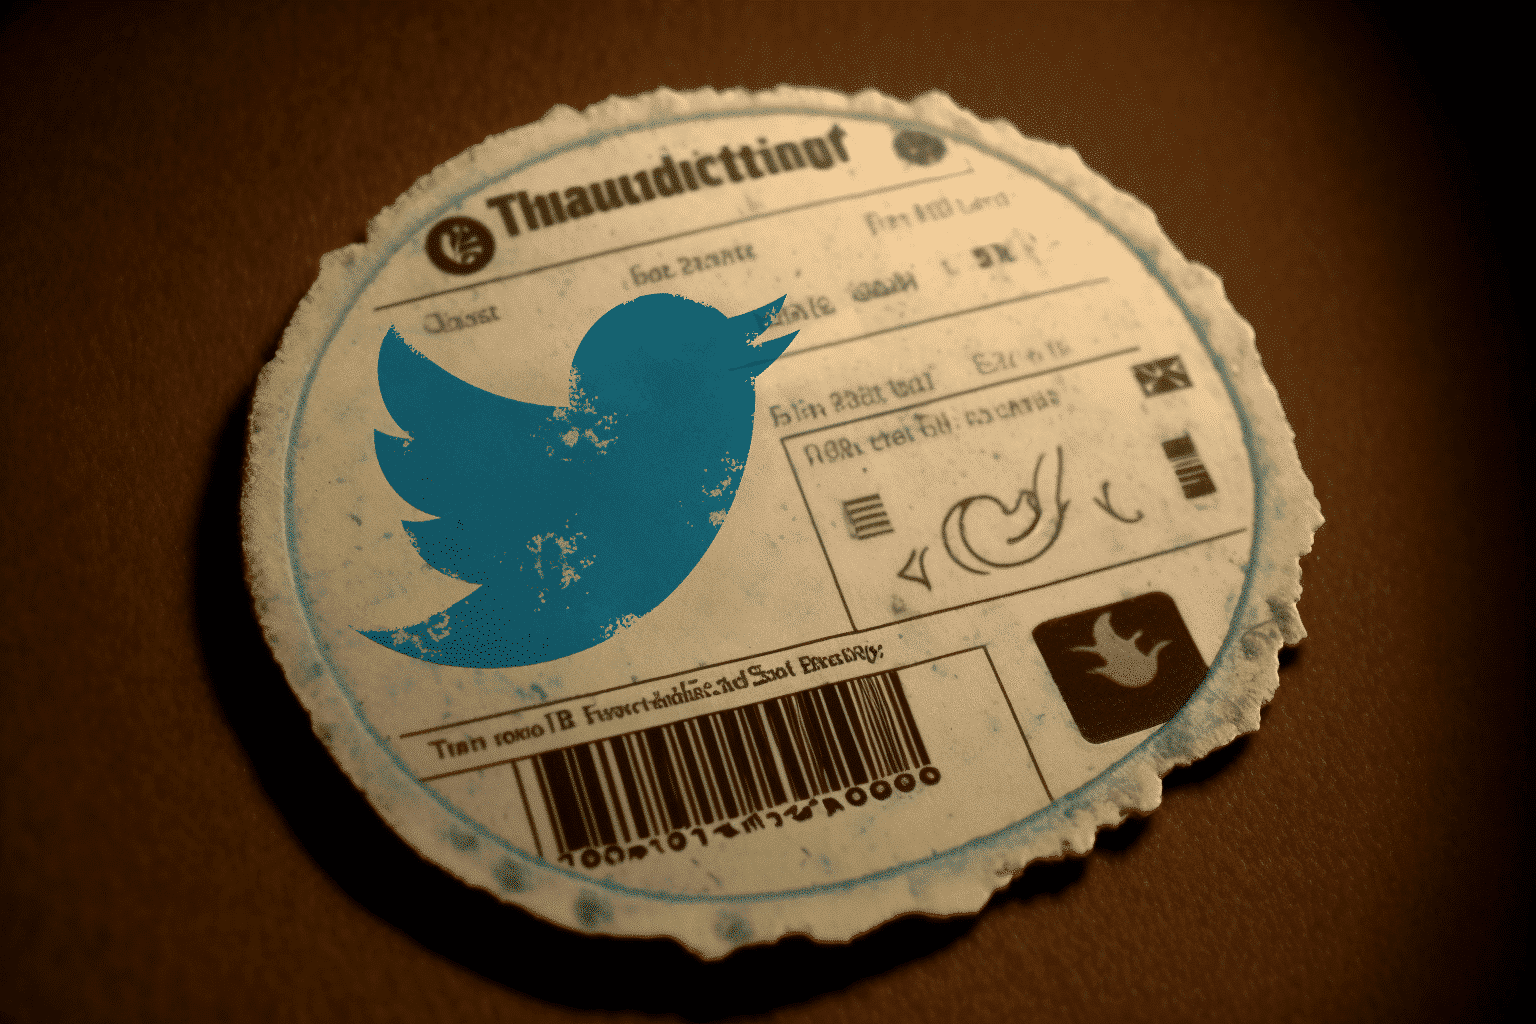 twitter-removes-verification-check-mark-from-the-new-york-times-main-account